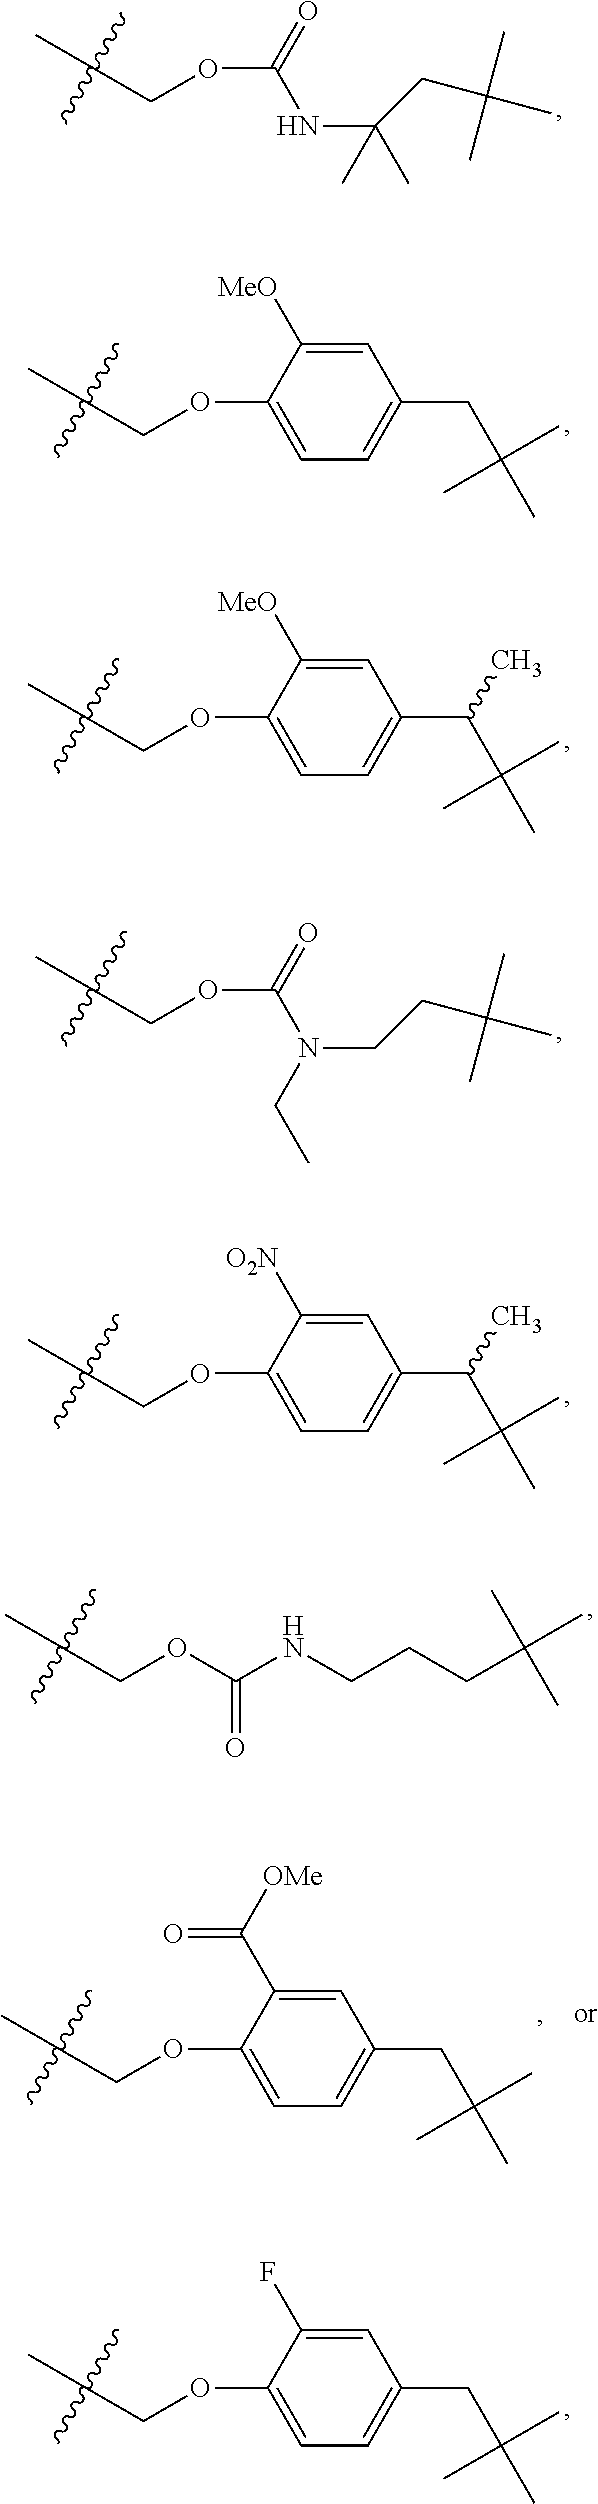 Hypoxia activated prodrugs and mtor inhibitors for treating cancer